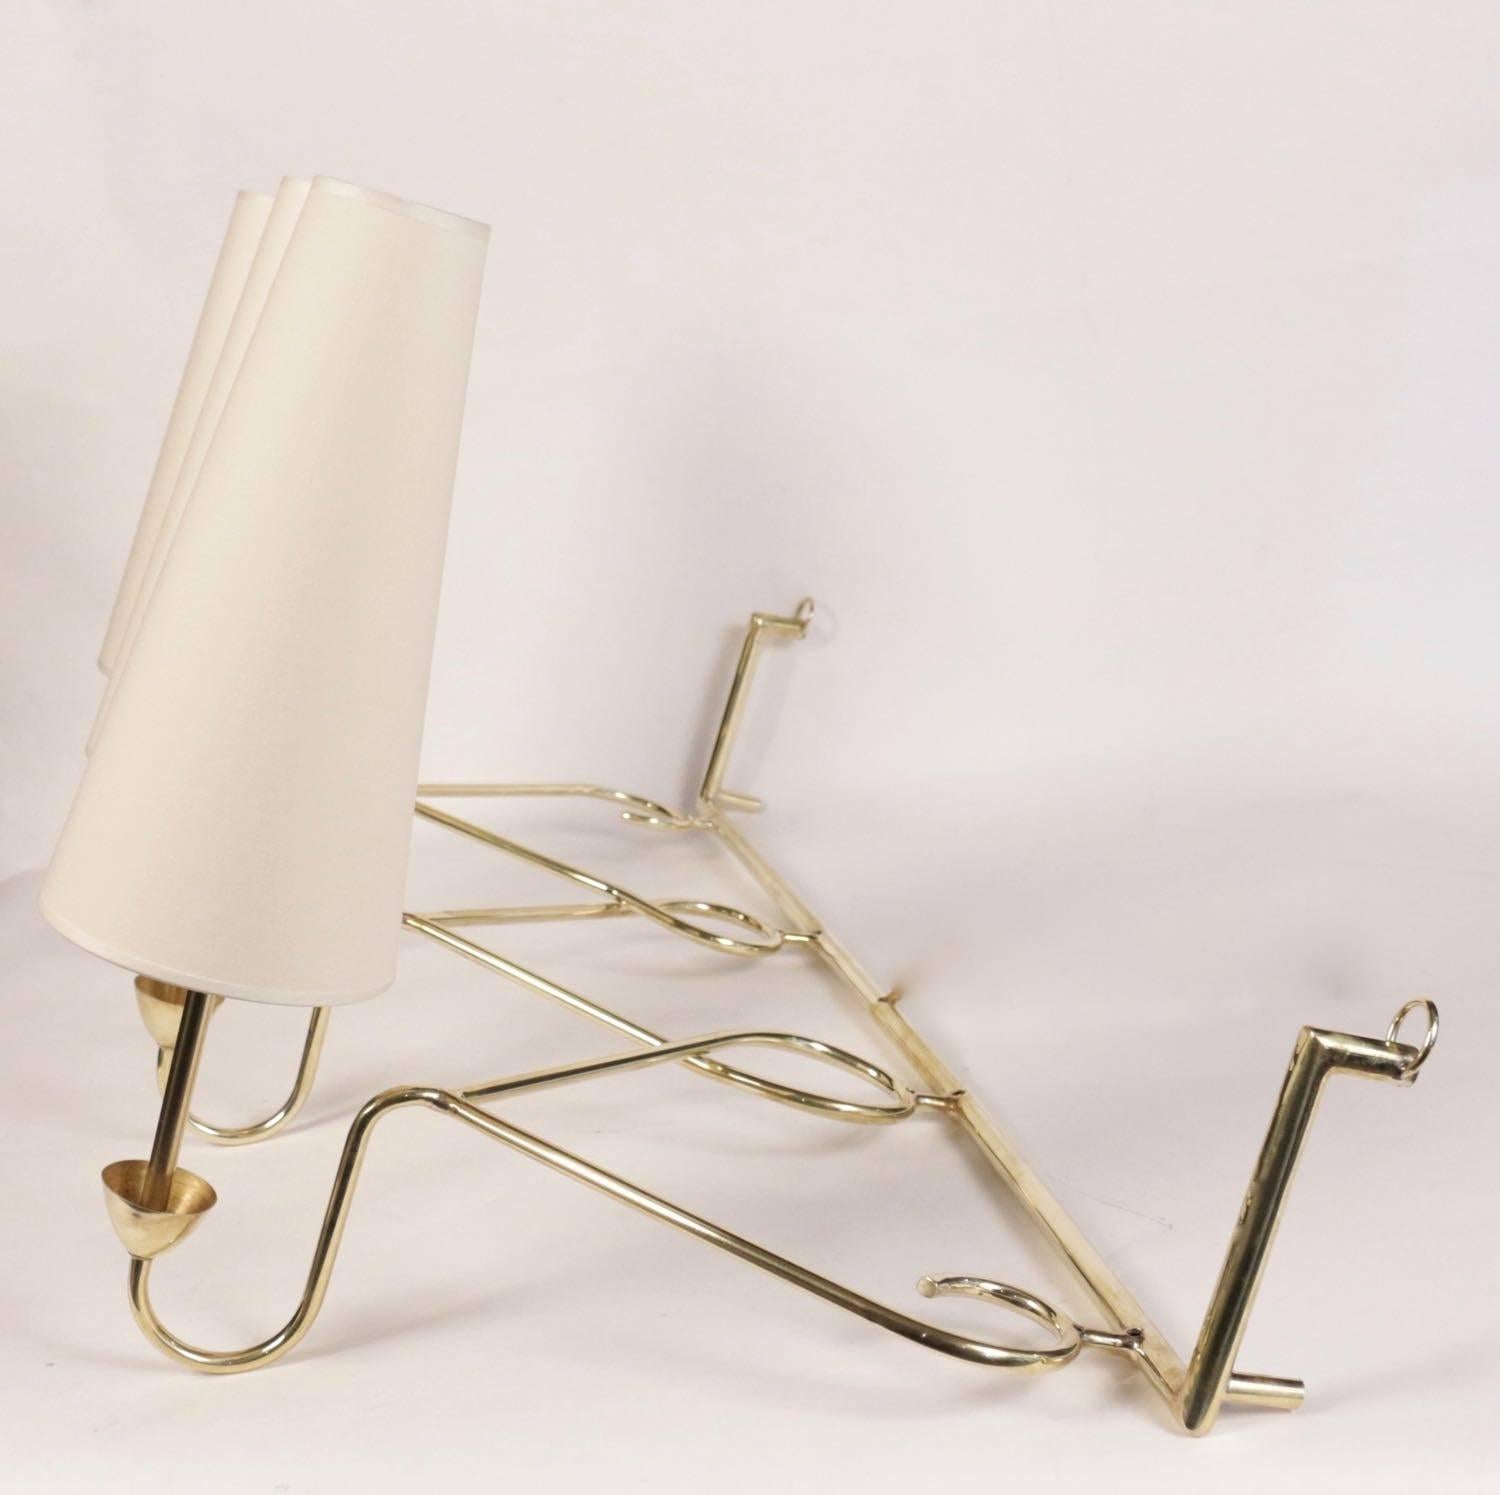 Large 1950s sconce House Stilnovo Style.

Nice curved brass work. Each sconce's base underlined with a brass cup.
Three lighted arms surmounted by custom lampshades.